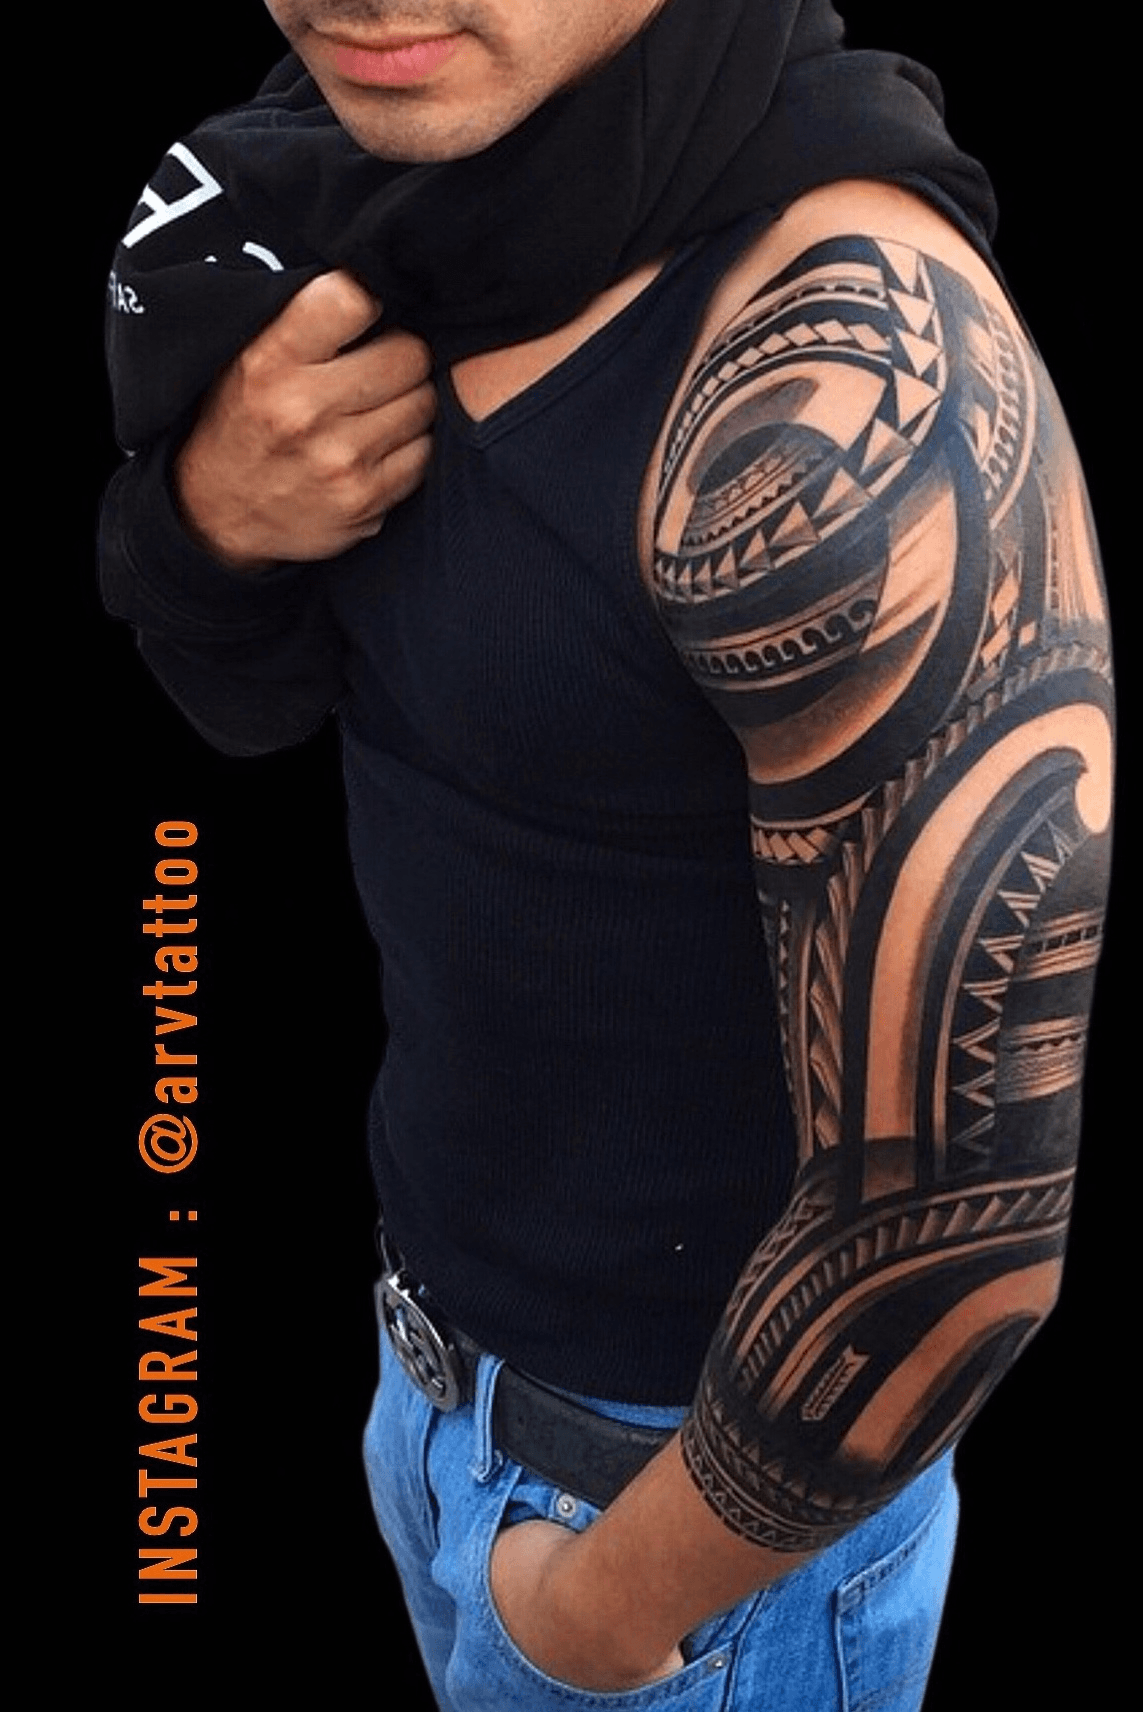 XPOZE TATTOO  First  Highest Tattoo maker shopstudio in UP based in  Kanpur